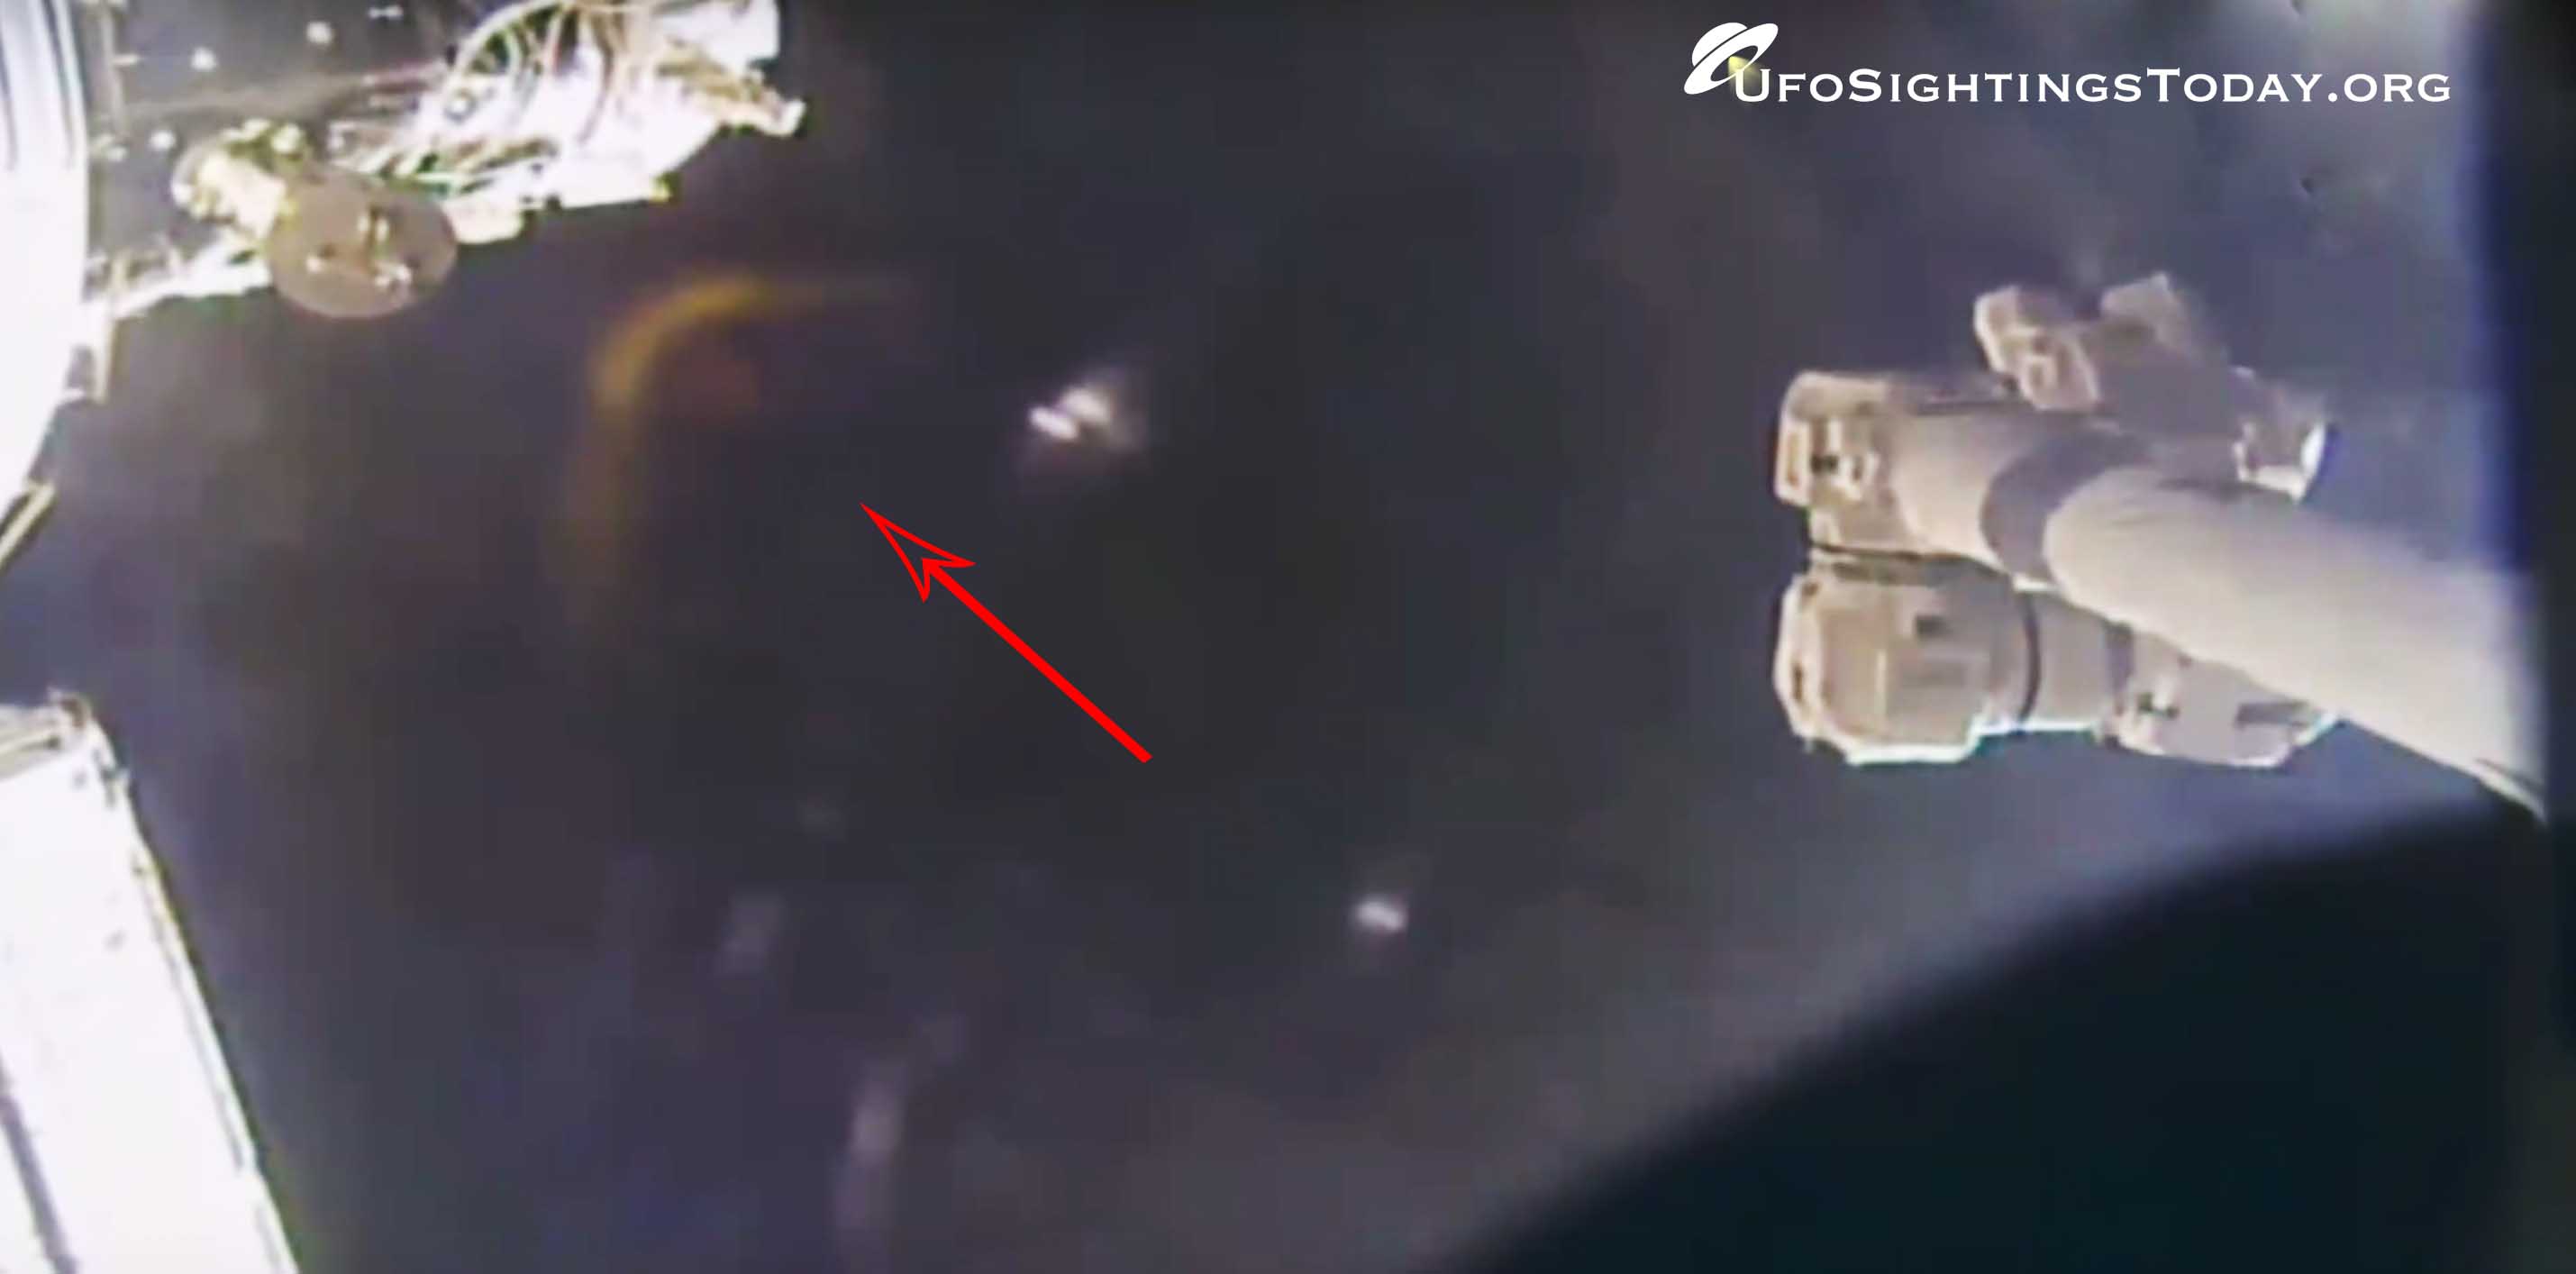 ISS cameras caught footage of a ufo